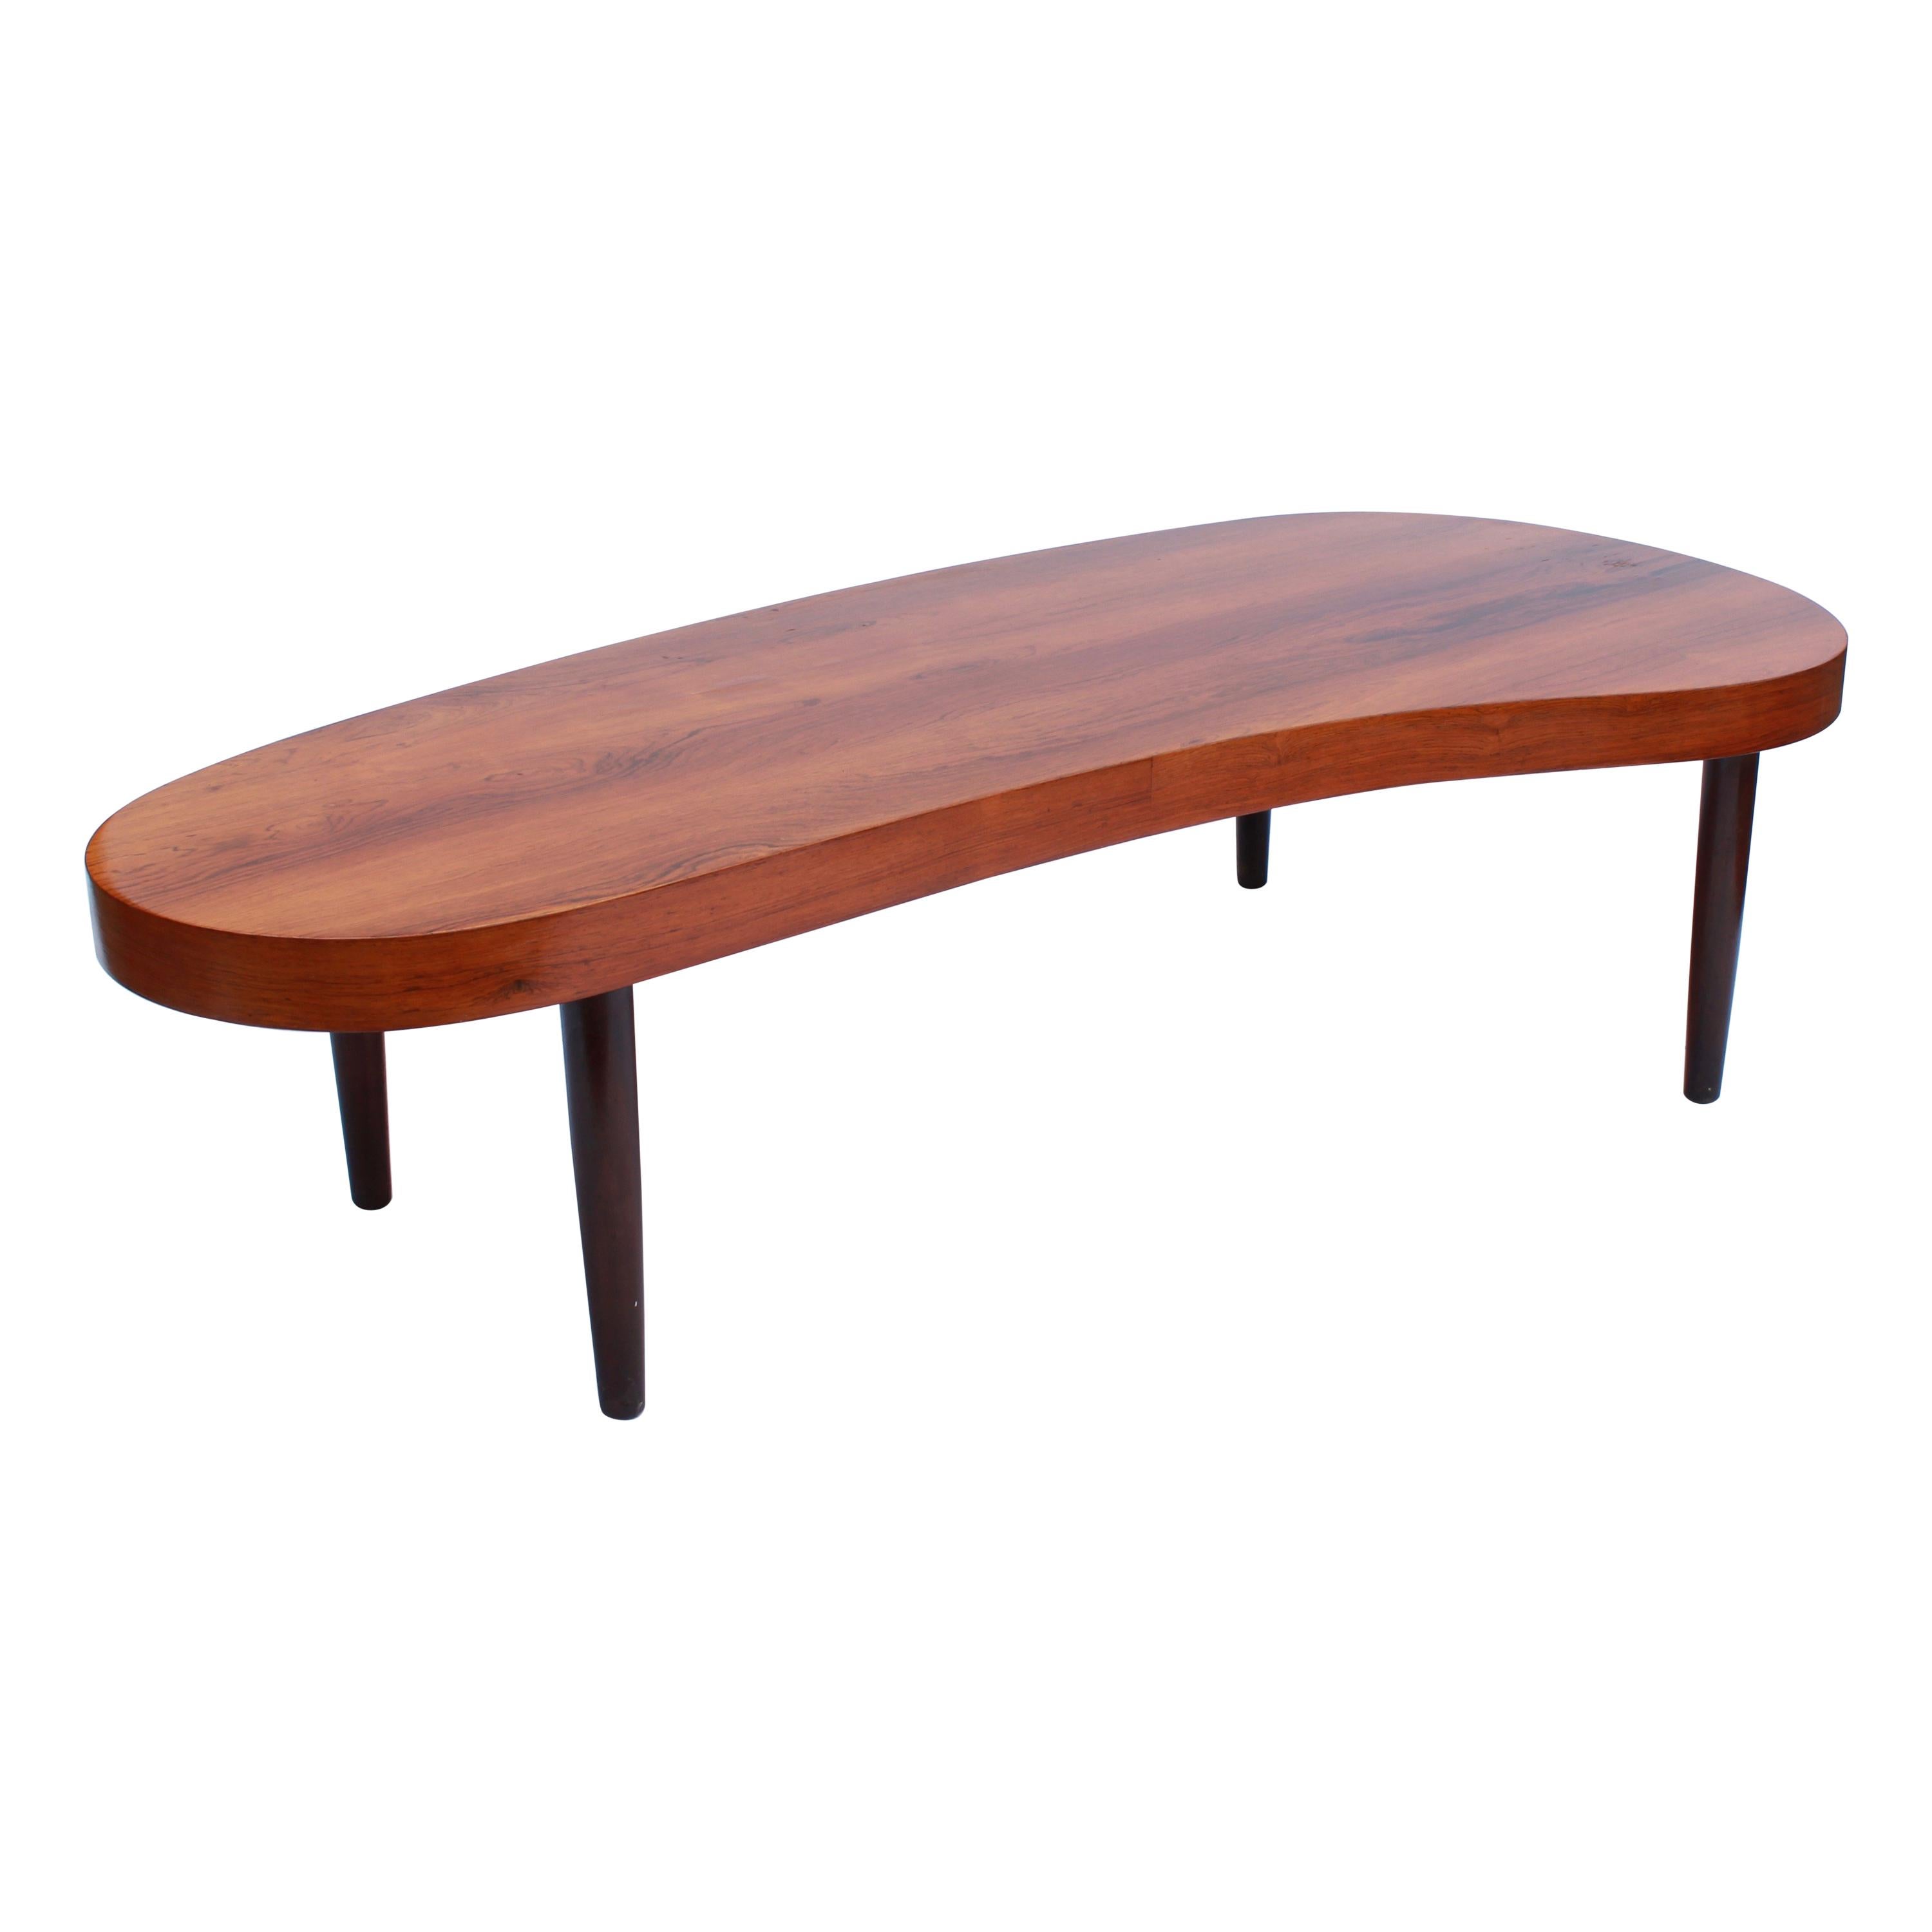 Coffee Table in Rosewood of Danish Design and Danish Cabinetmaker from the 1960s